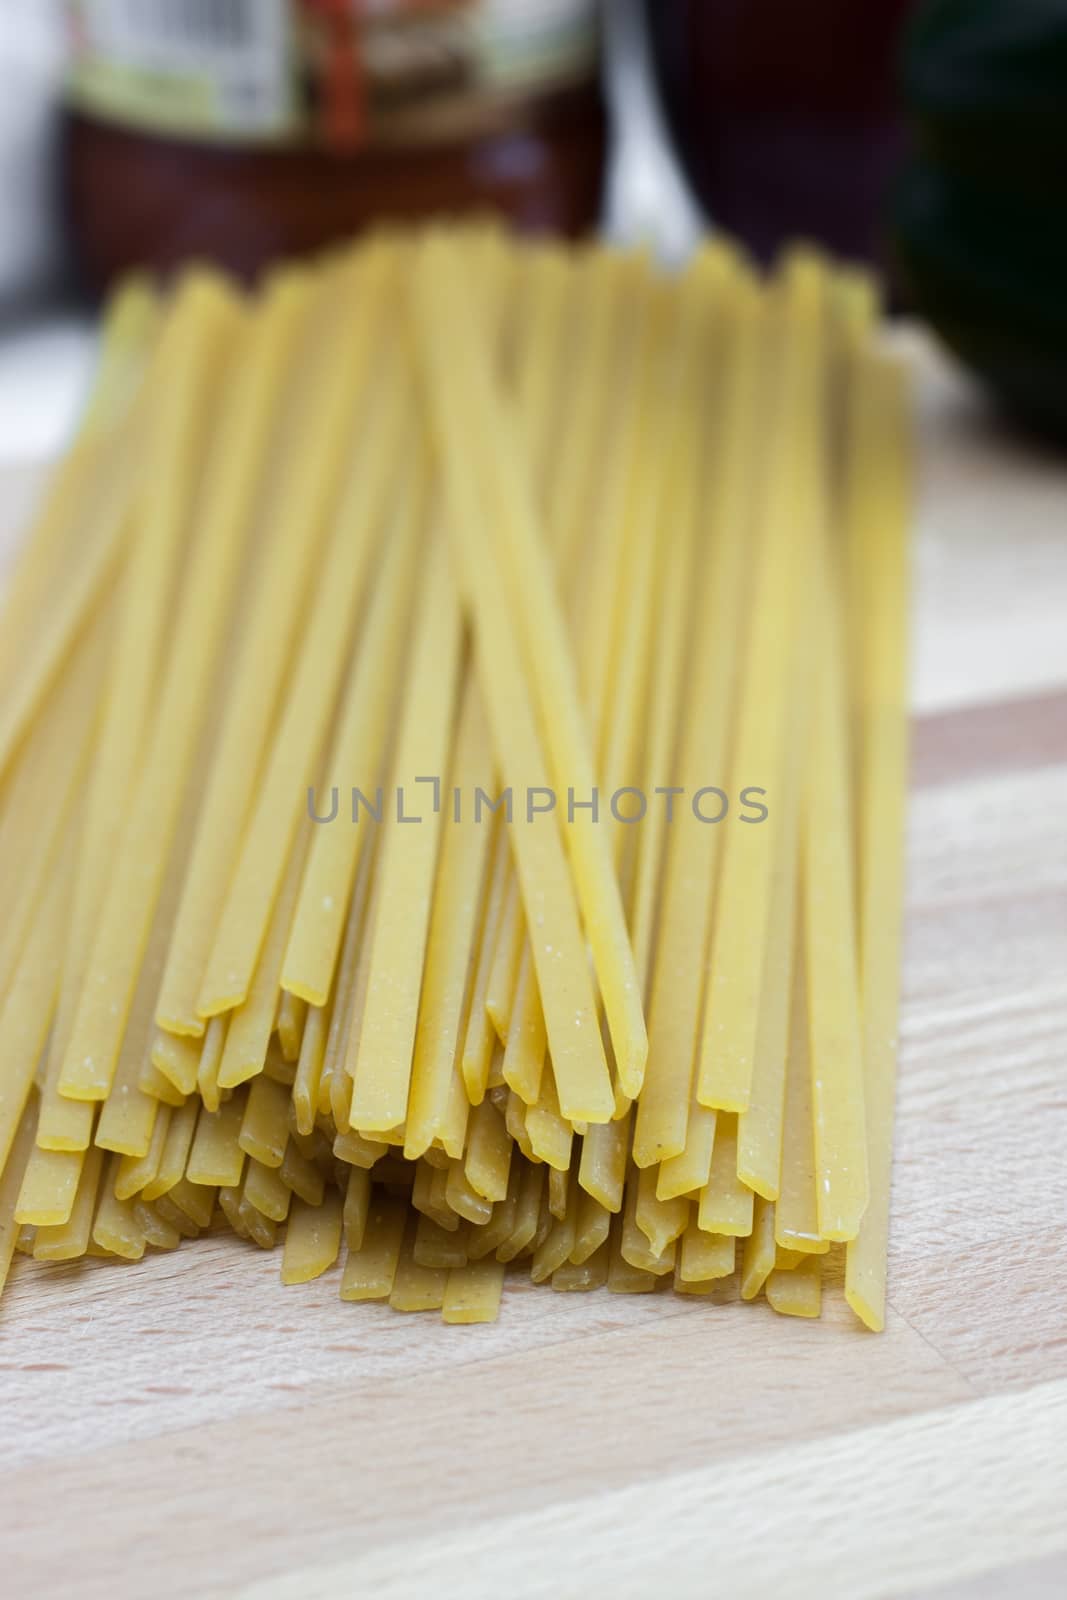 Dry Fetticcine Pasta by SouthernLightStudios